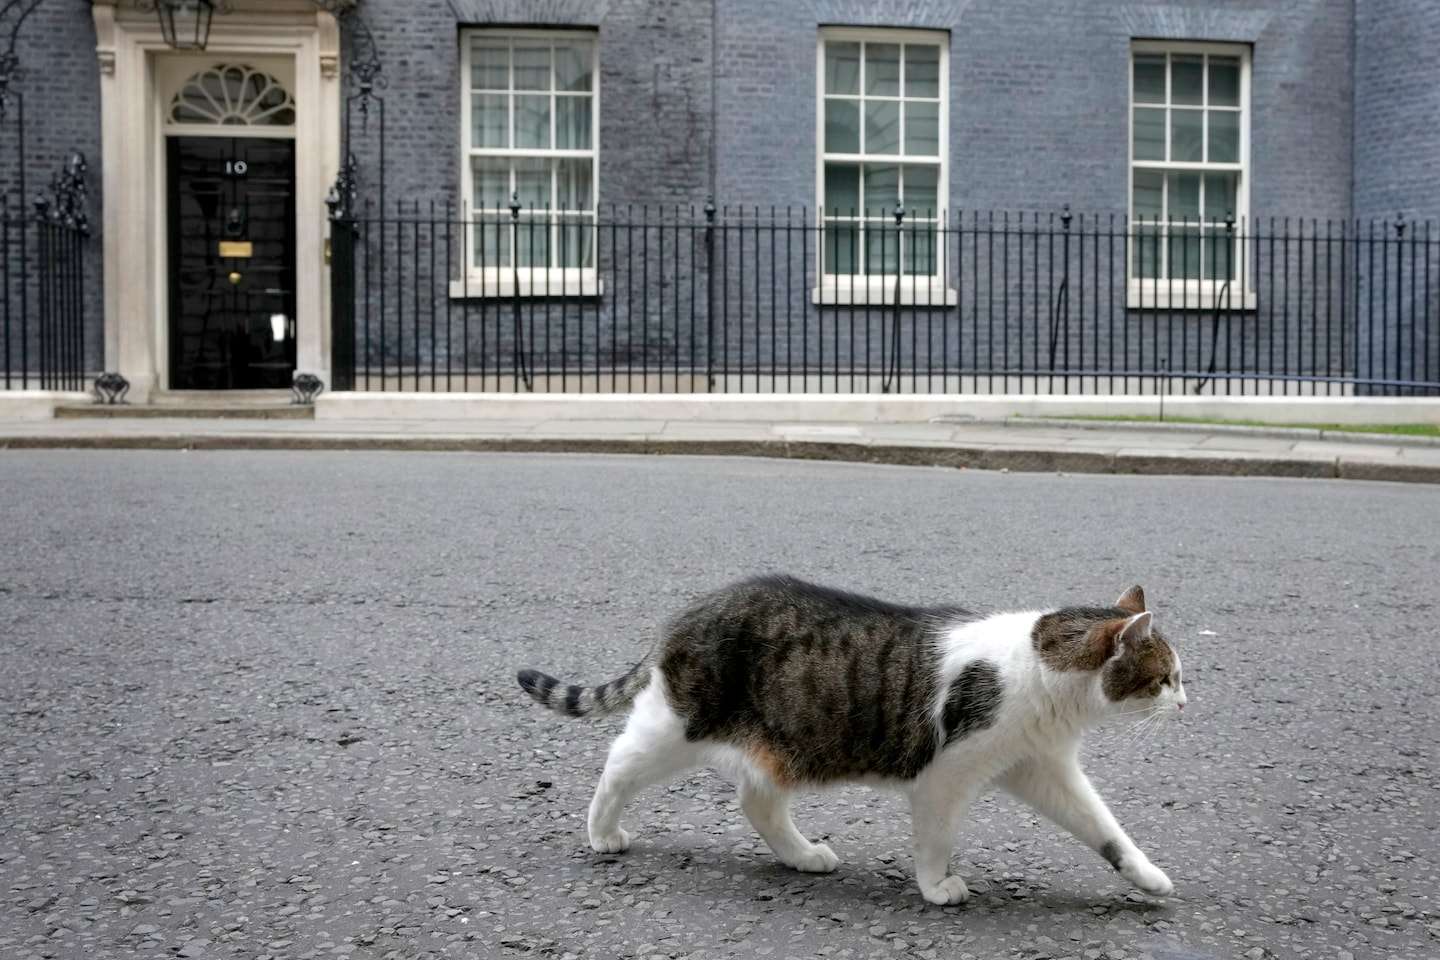 Larry the Cat chases much larger fox from Downing Street